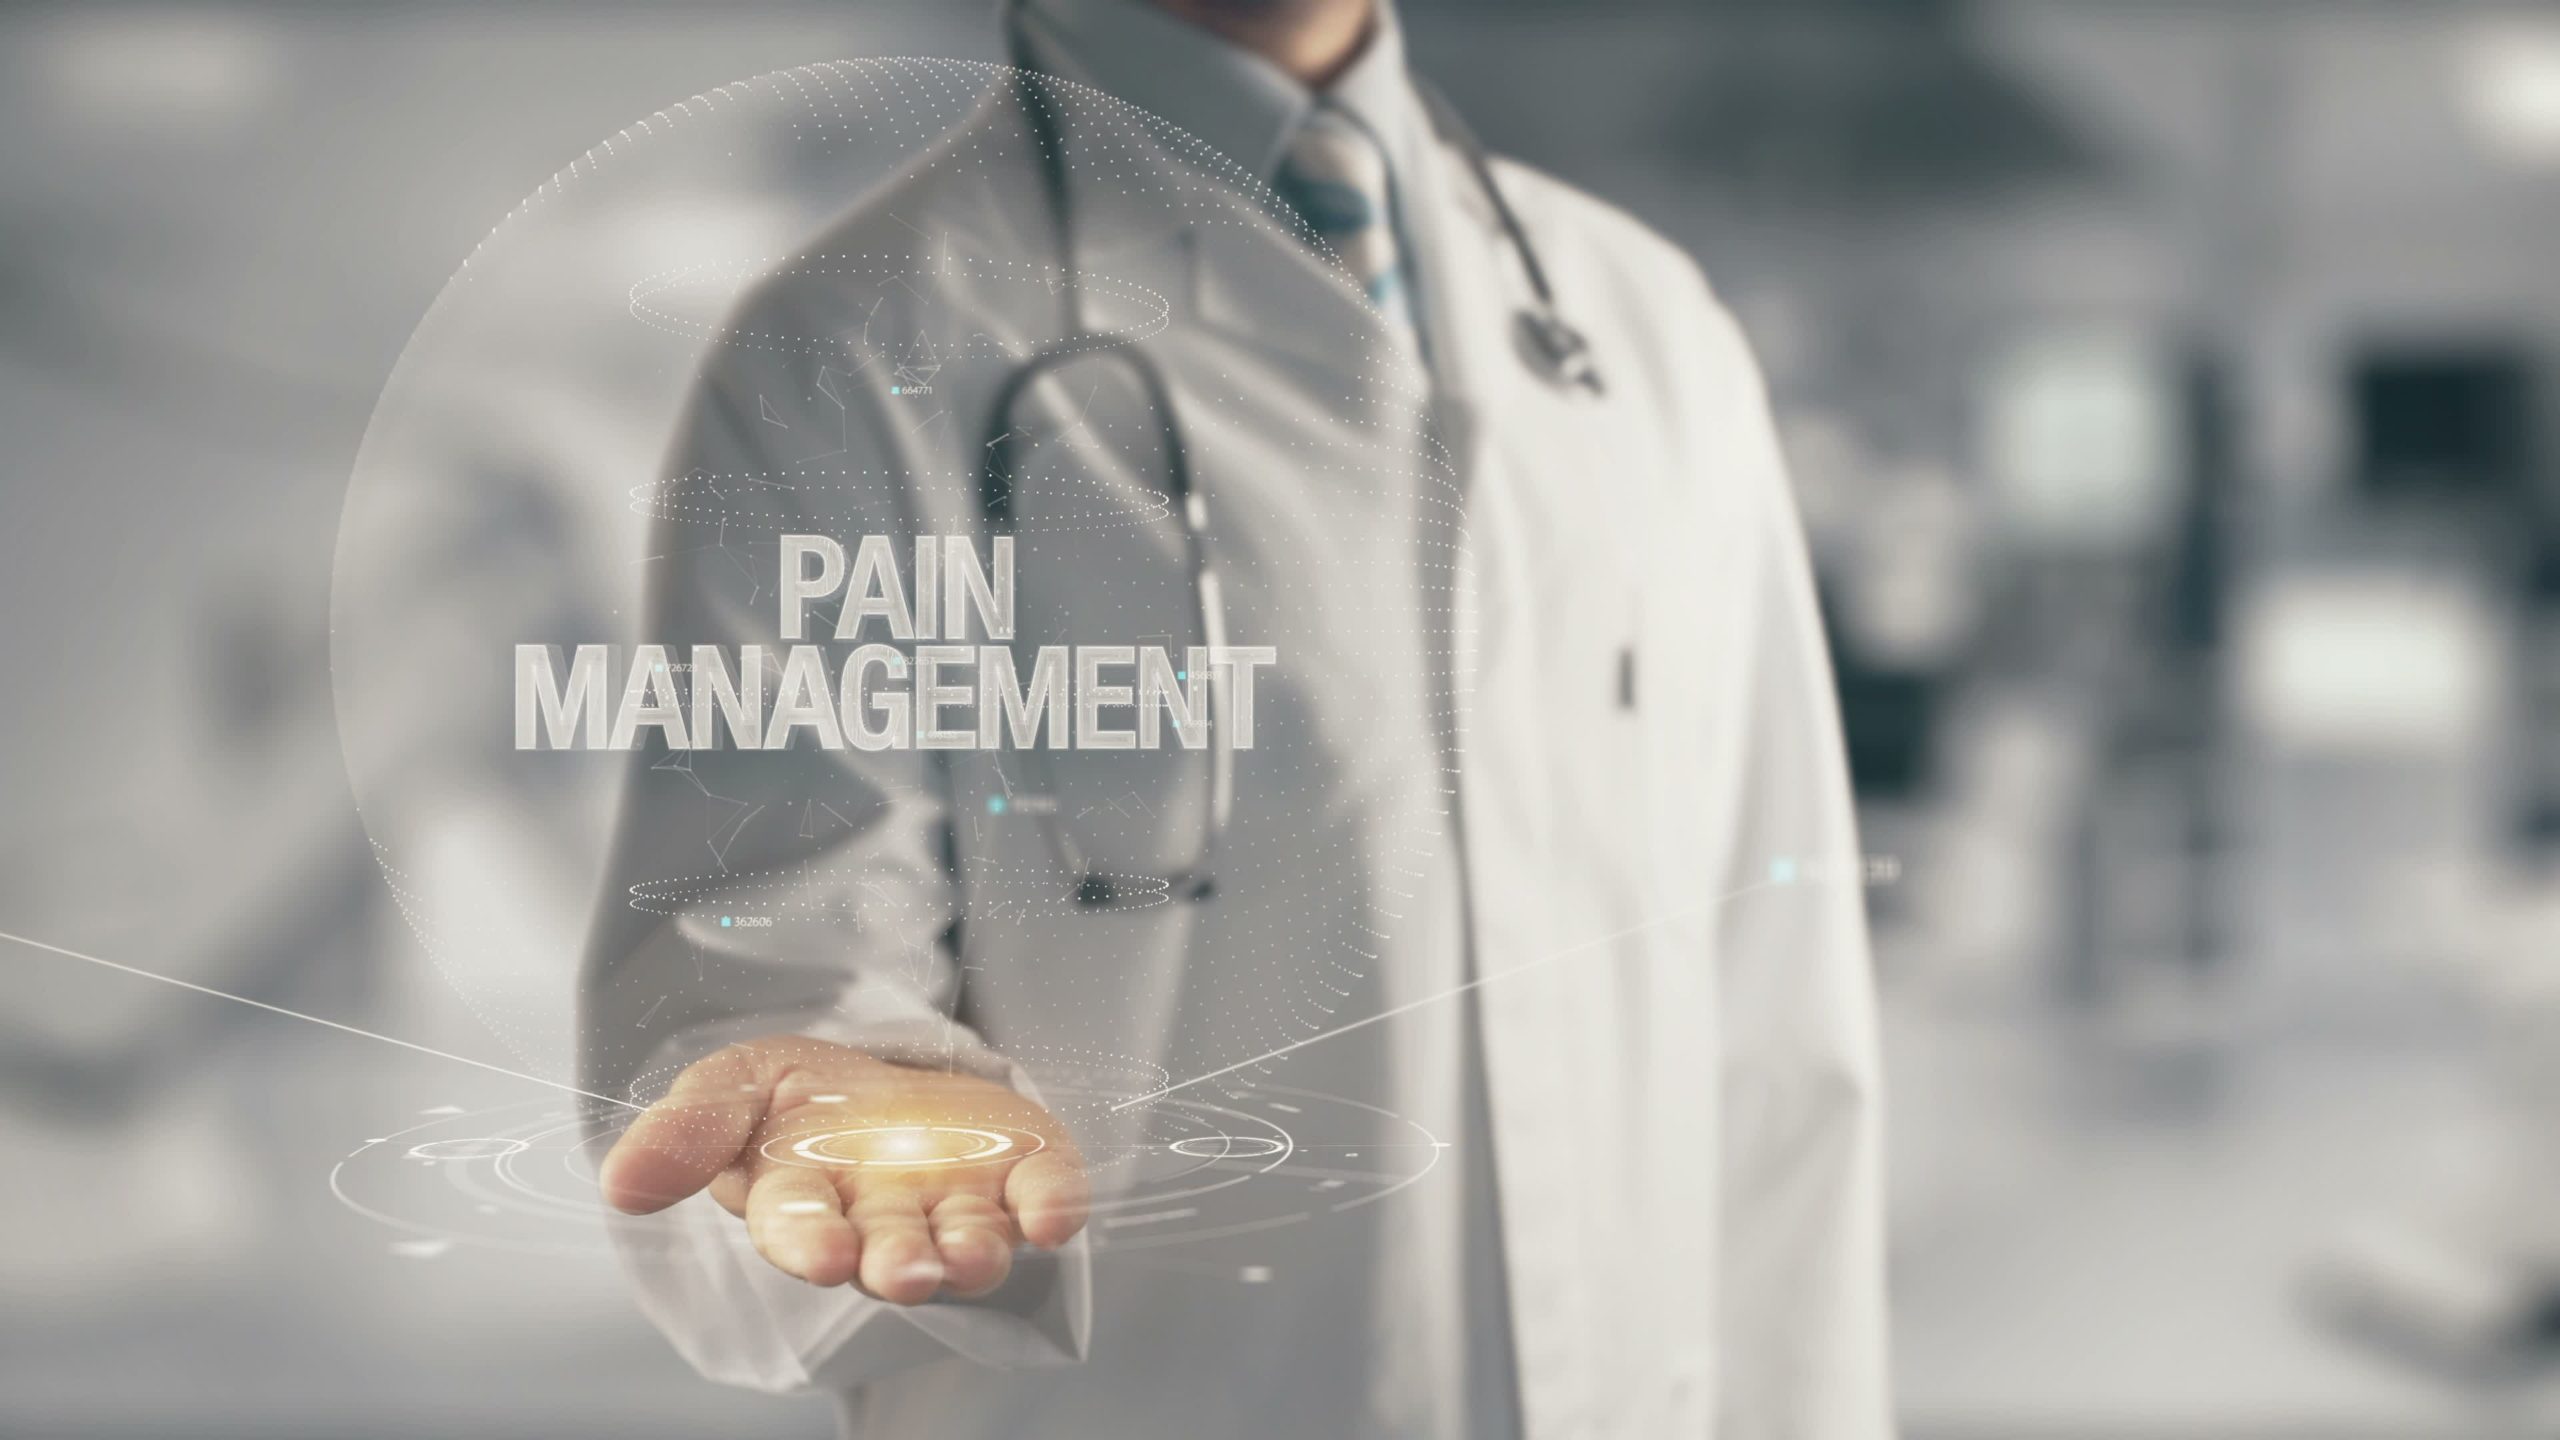 What Techniques Work Better for Pain Management